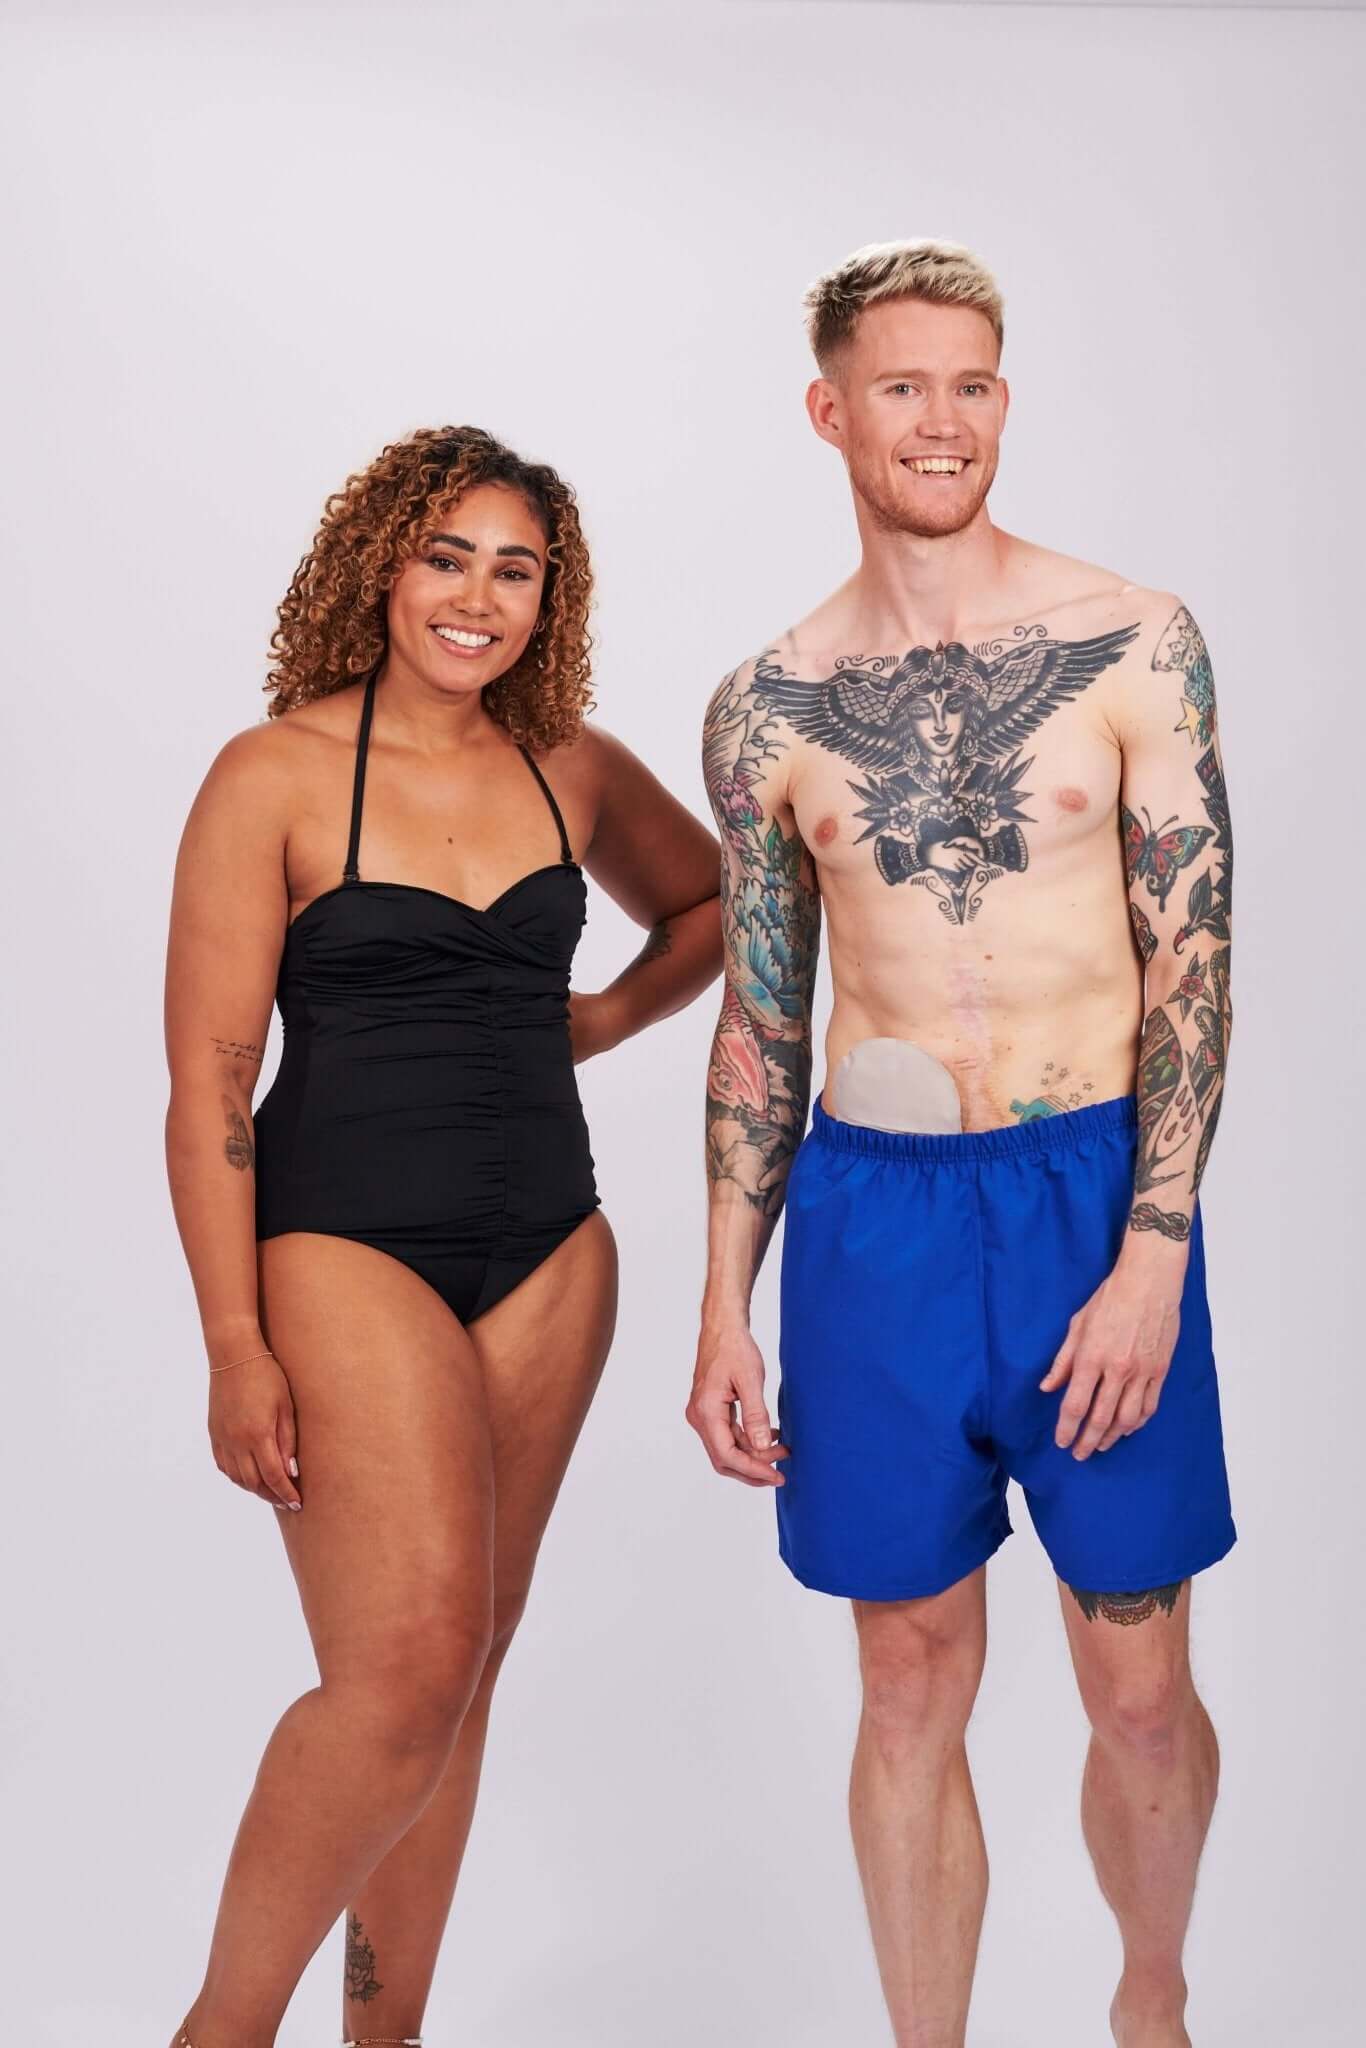 Shop Alicia Ostomy Swimsuit only £34.99 at whiteroseostomy.co.uk- with free UK delivery on all orders over £50